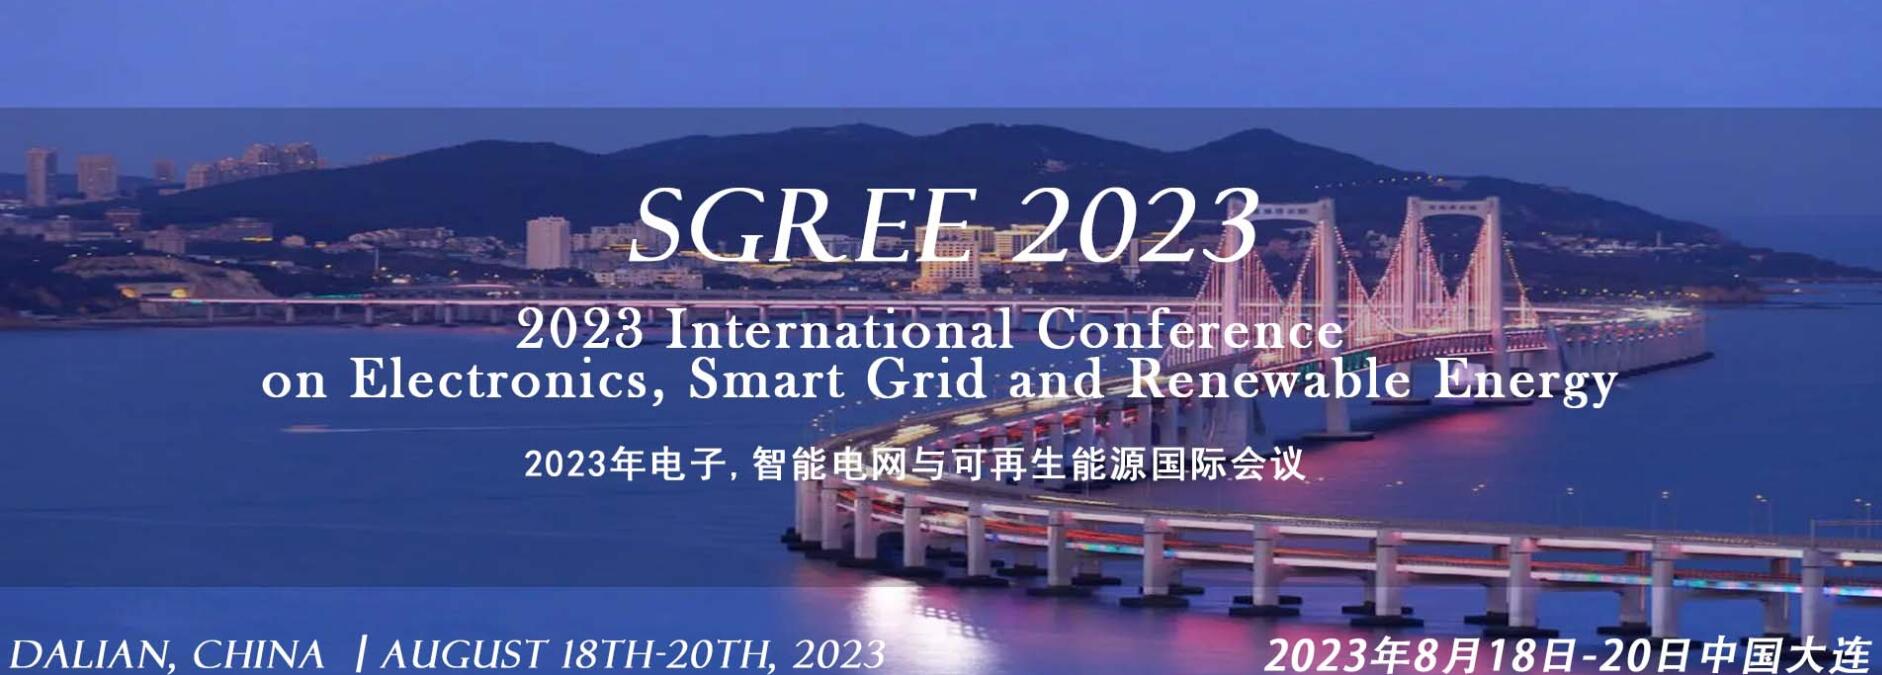 2023 International Conference on Electronics, Smart Grid and Renewable Energy (SGREE 2023) -EI Compendex, Dalian, Liaoning, China